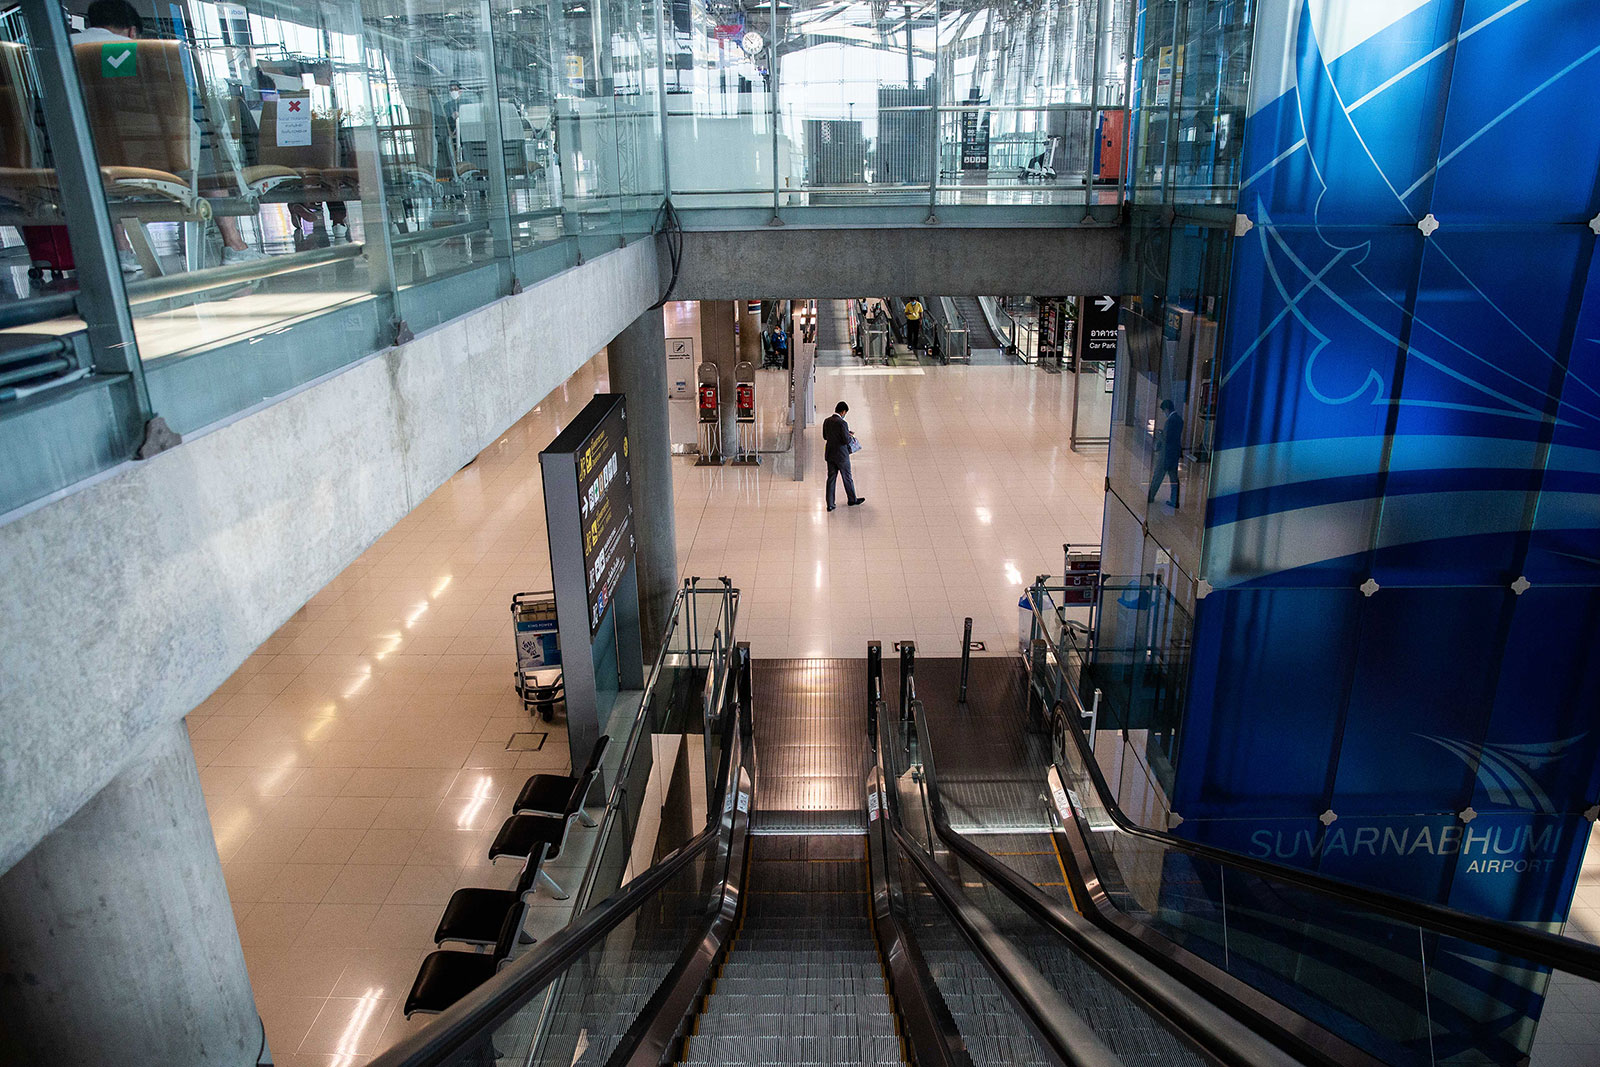 A nearly empty terminal at Suvarnabhumi Airport in Bangkok, Thailand, on April 3, after the government announced that the country would be suspending all international arrivals.